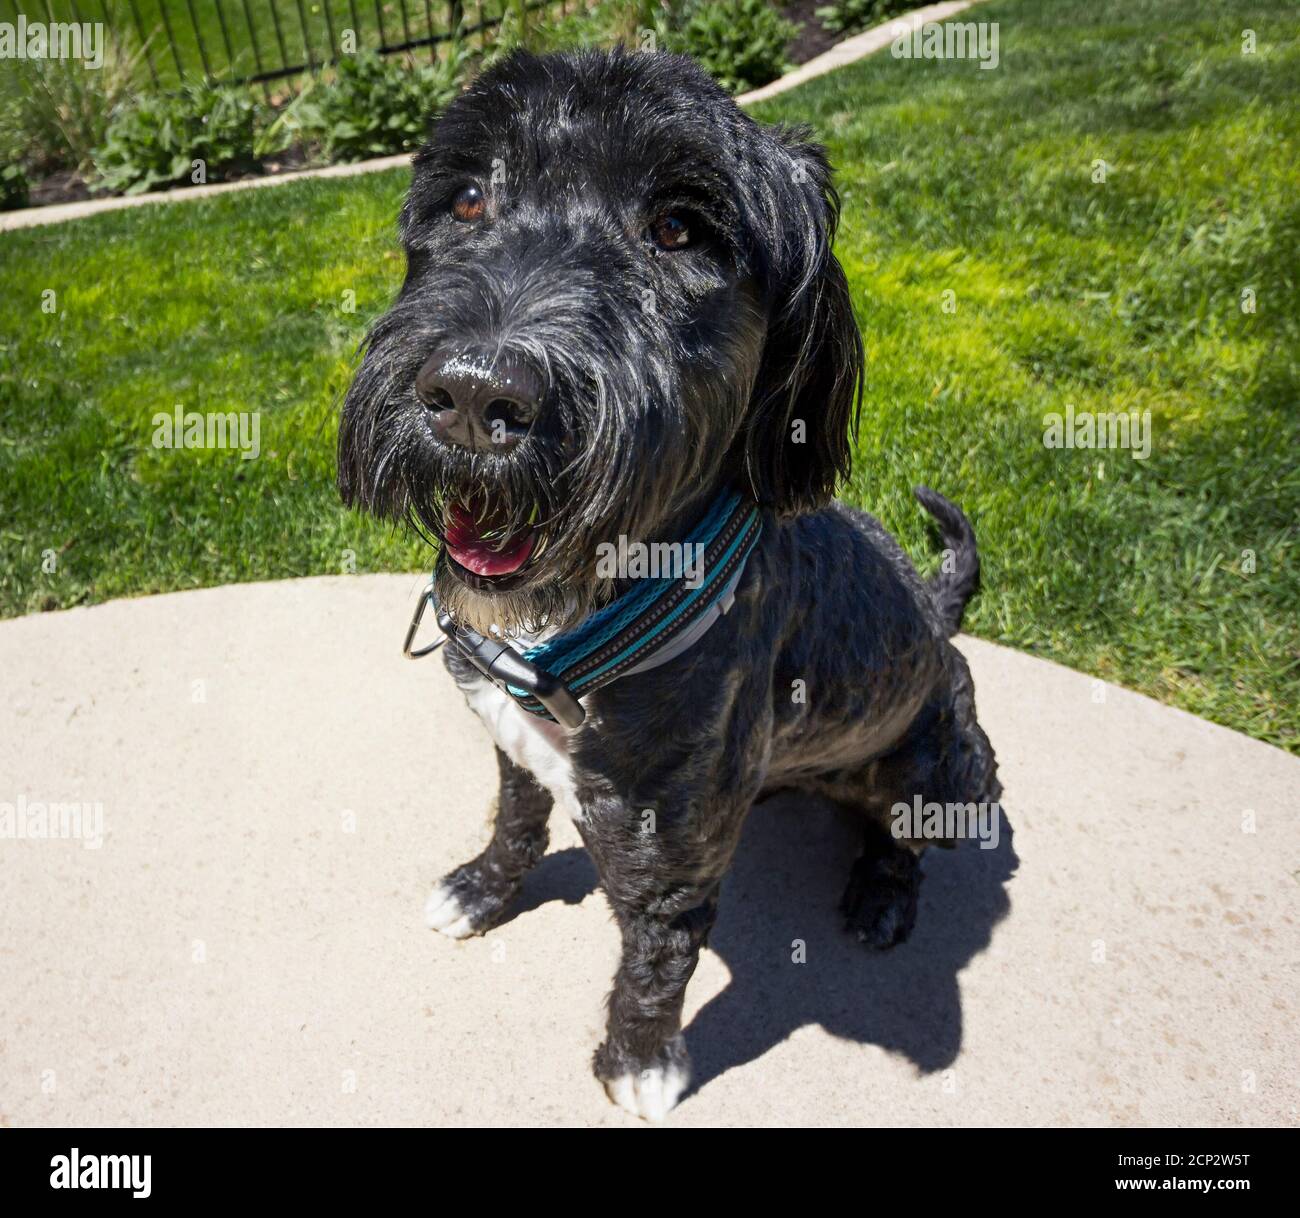 Portuguese Water Dog sitting on a backyard, wide angle lens photo Stock Photo